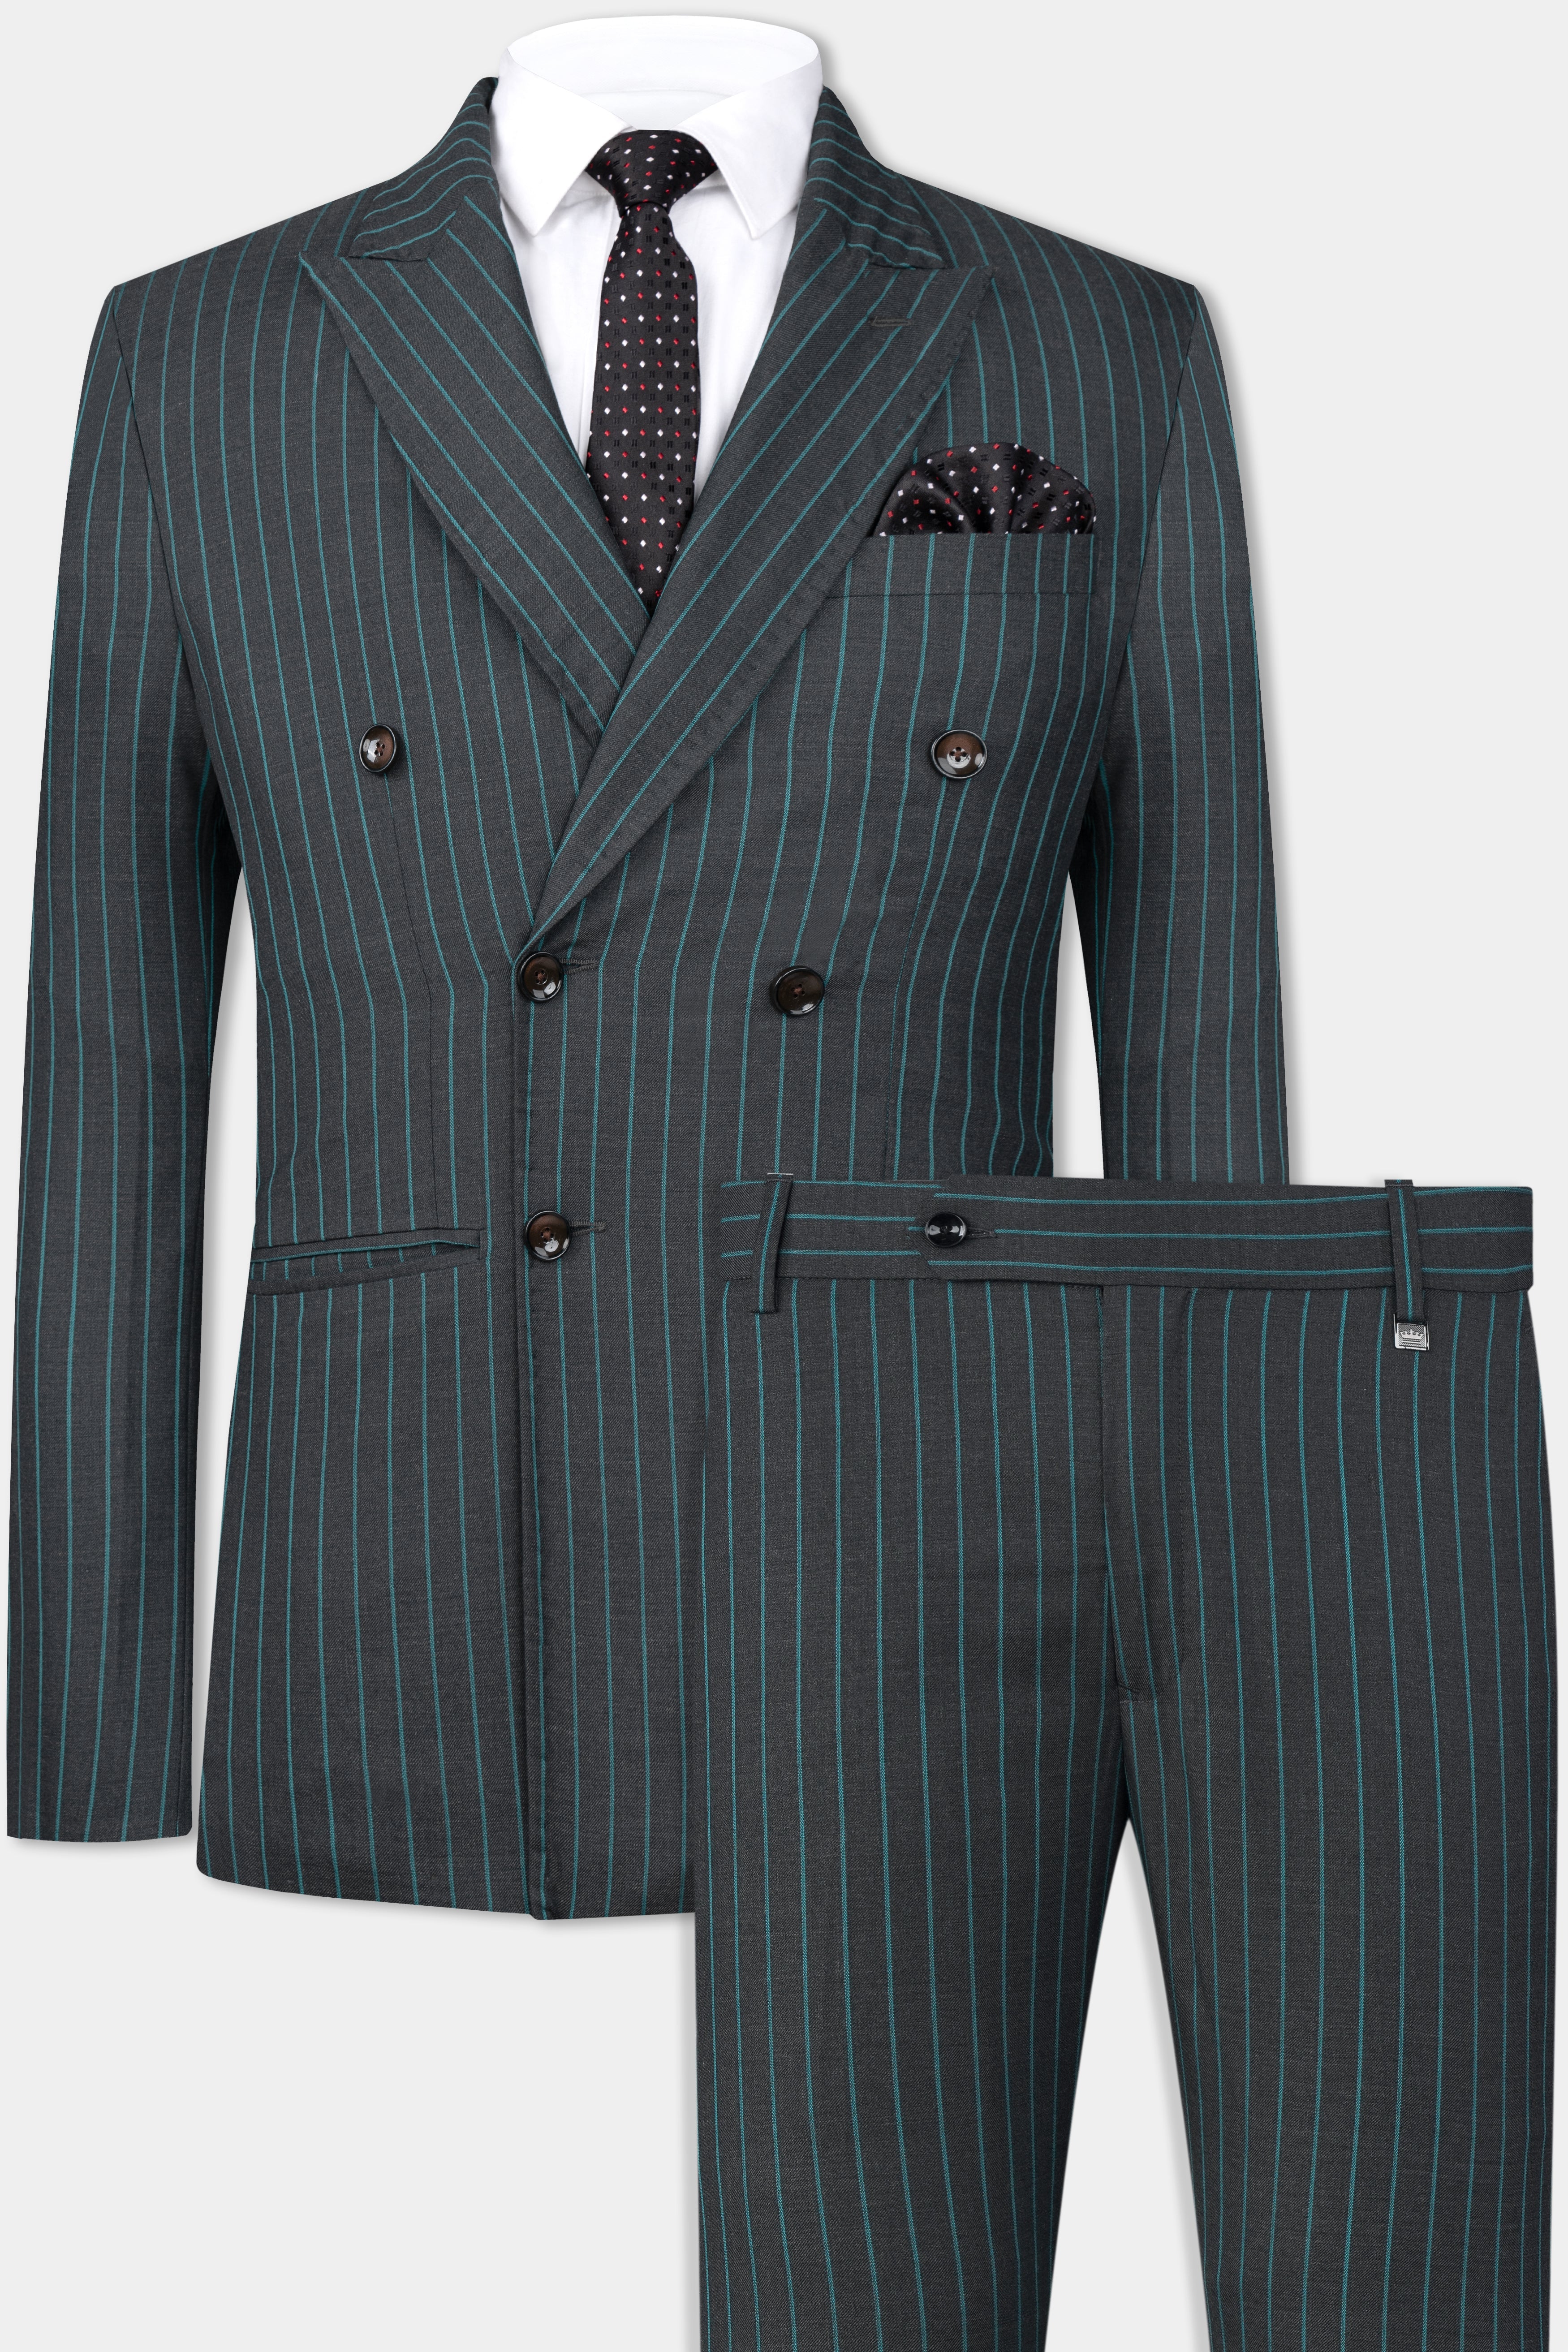 Fall's Most Important Suit Trend Is an Update on Pinstripes | GQ